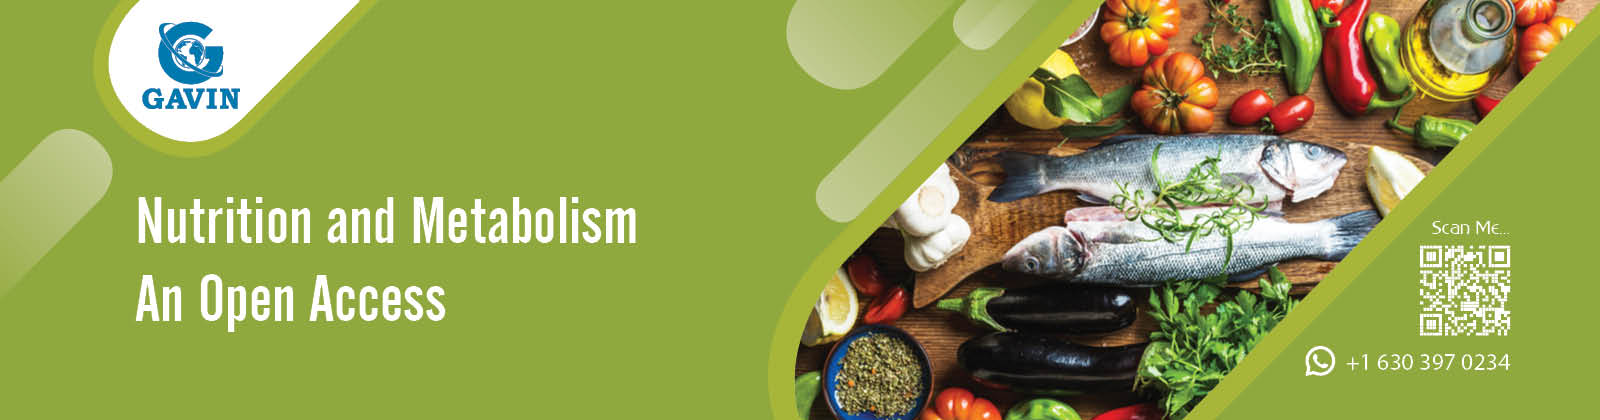 Nutrition and Metabolism An Open Access